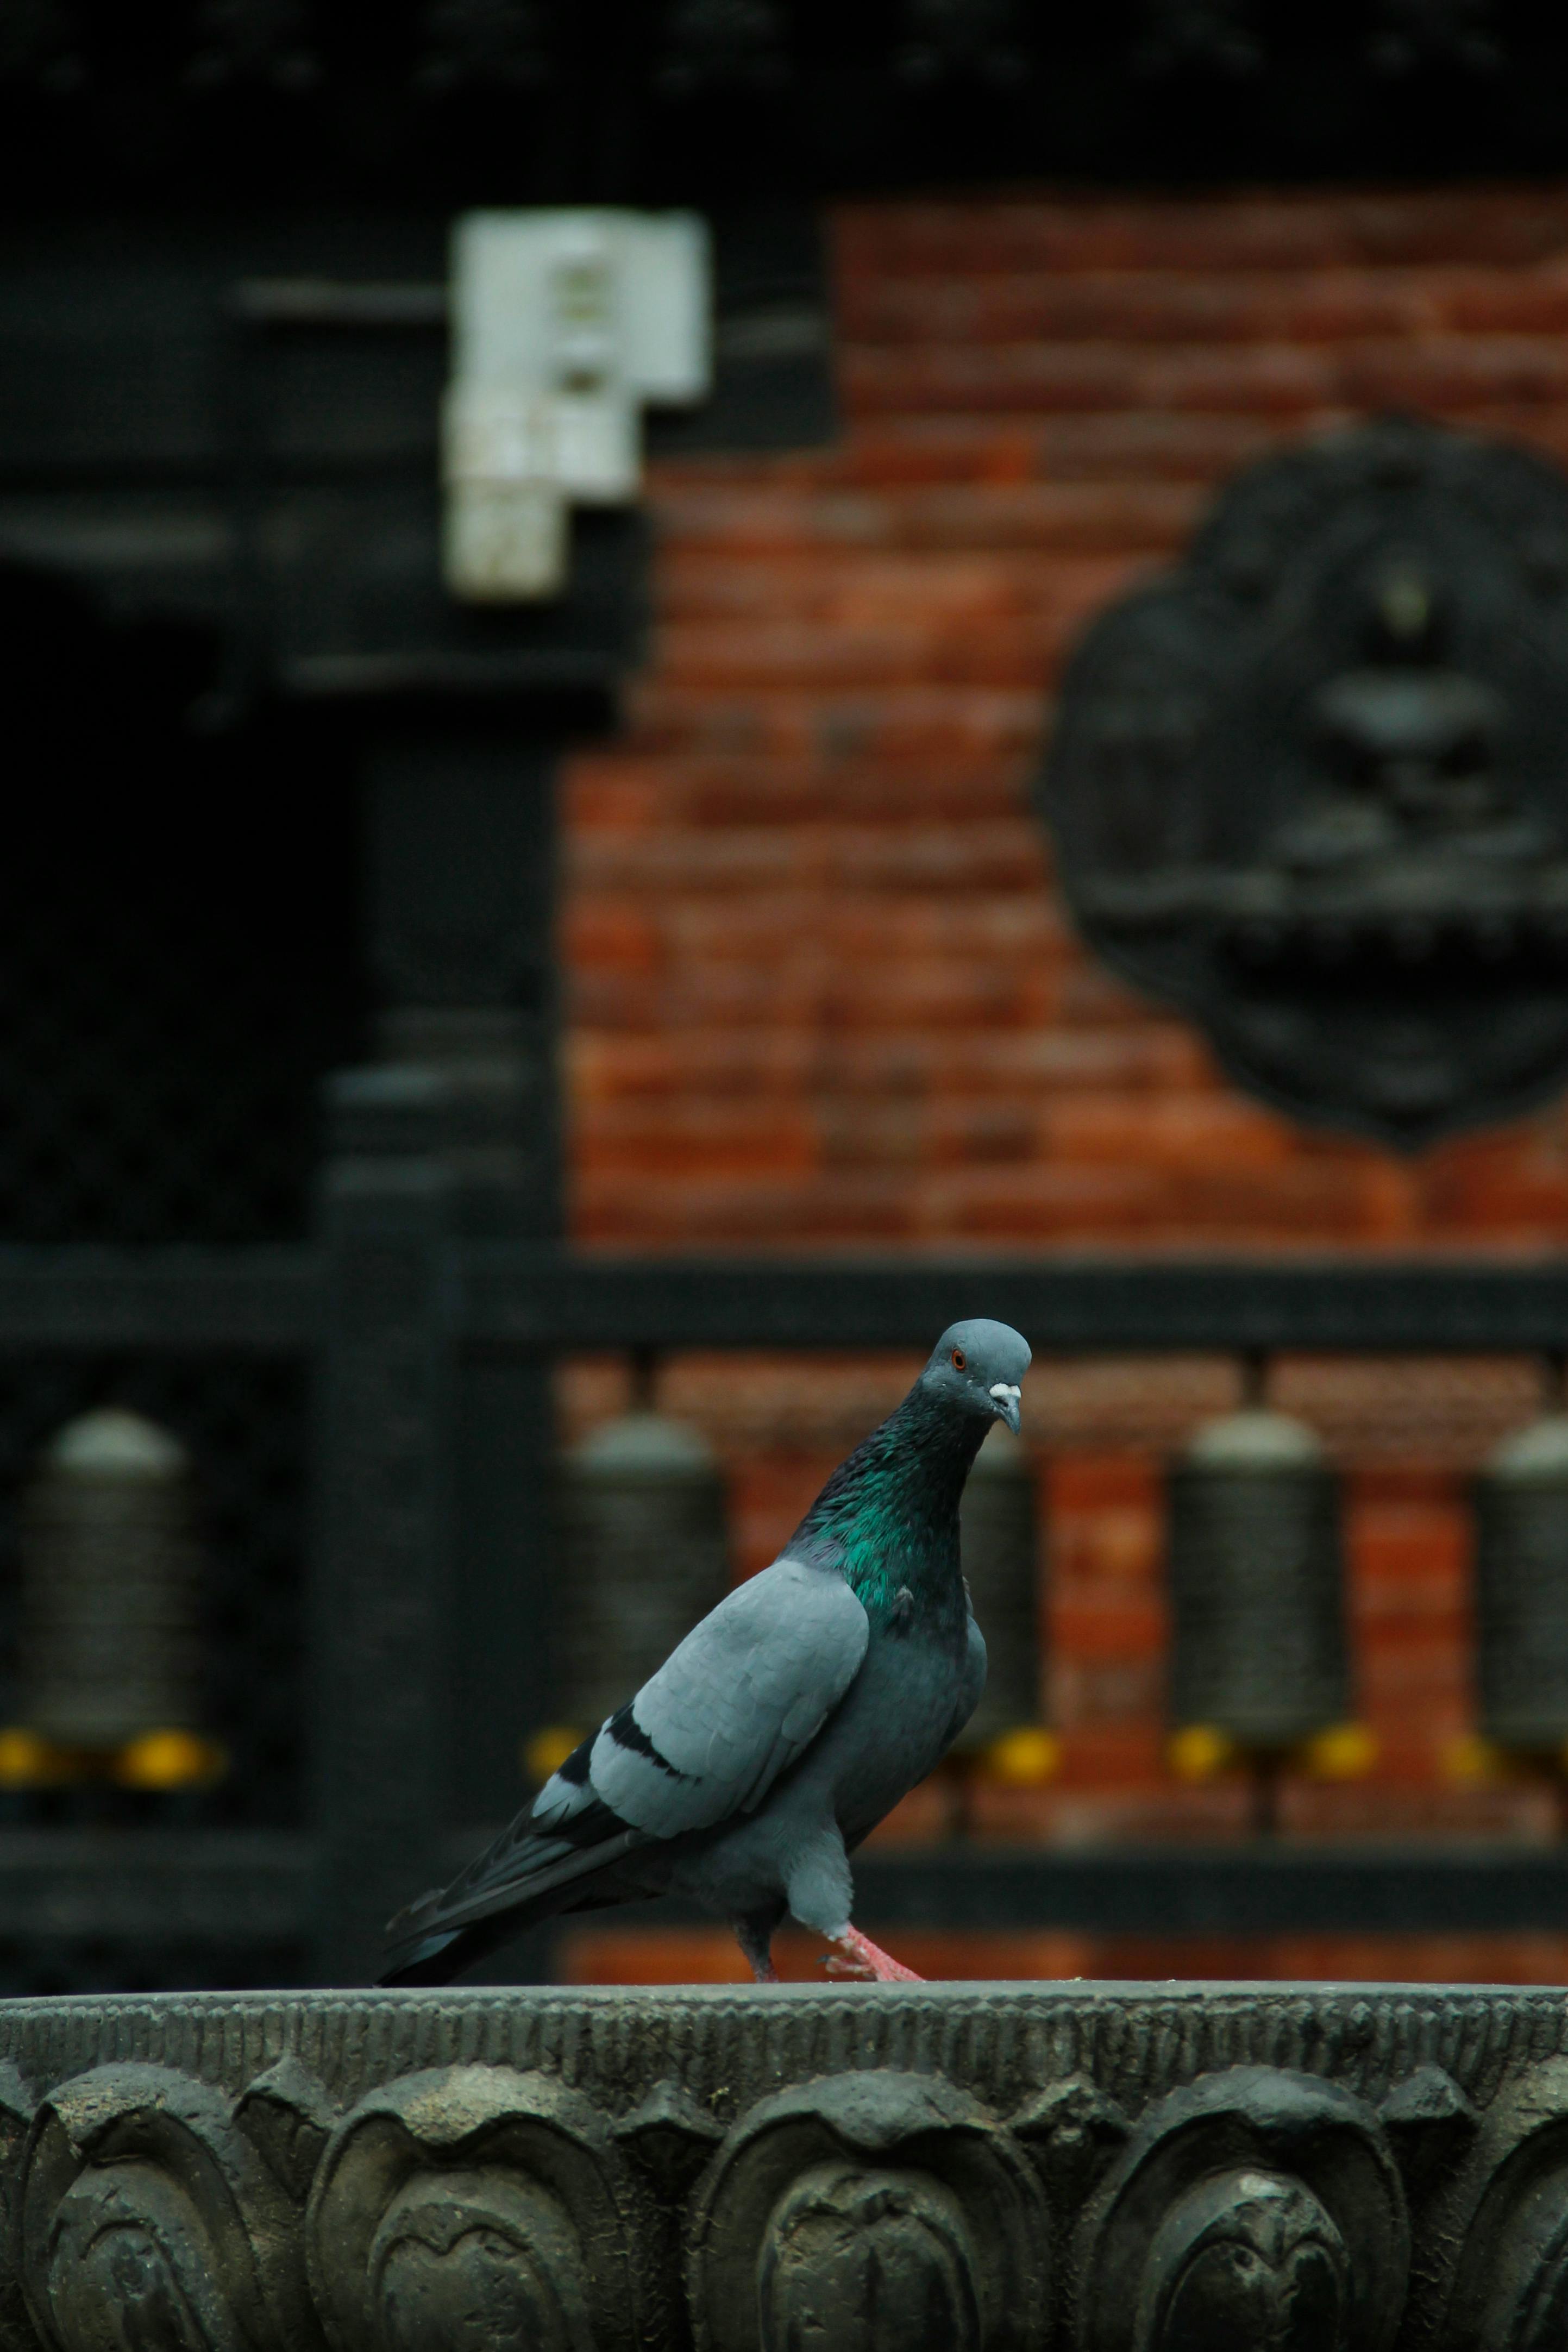 For illustration purposes only. A perched pigeon | Source: Pexels